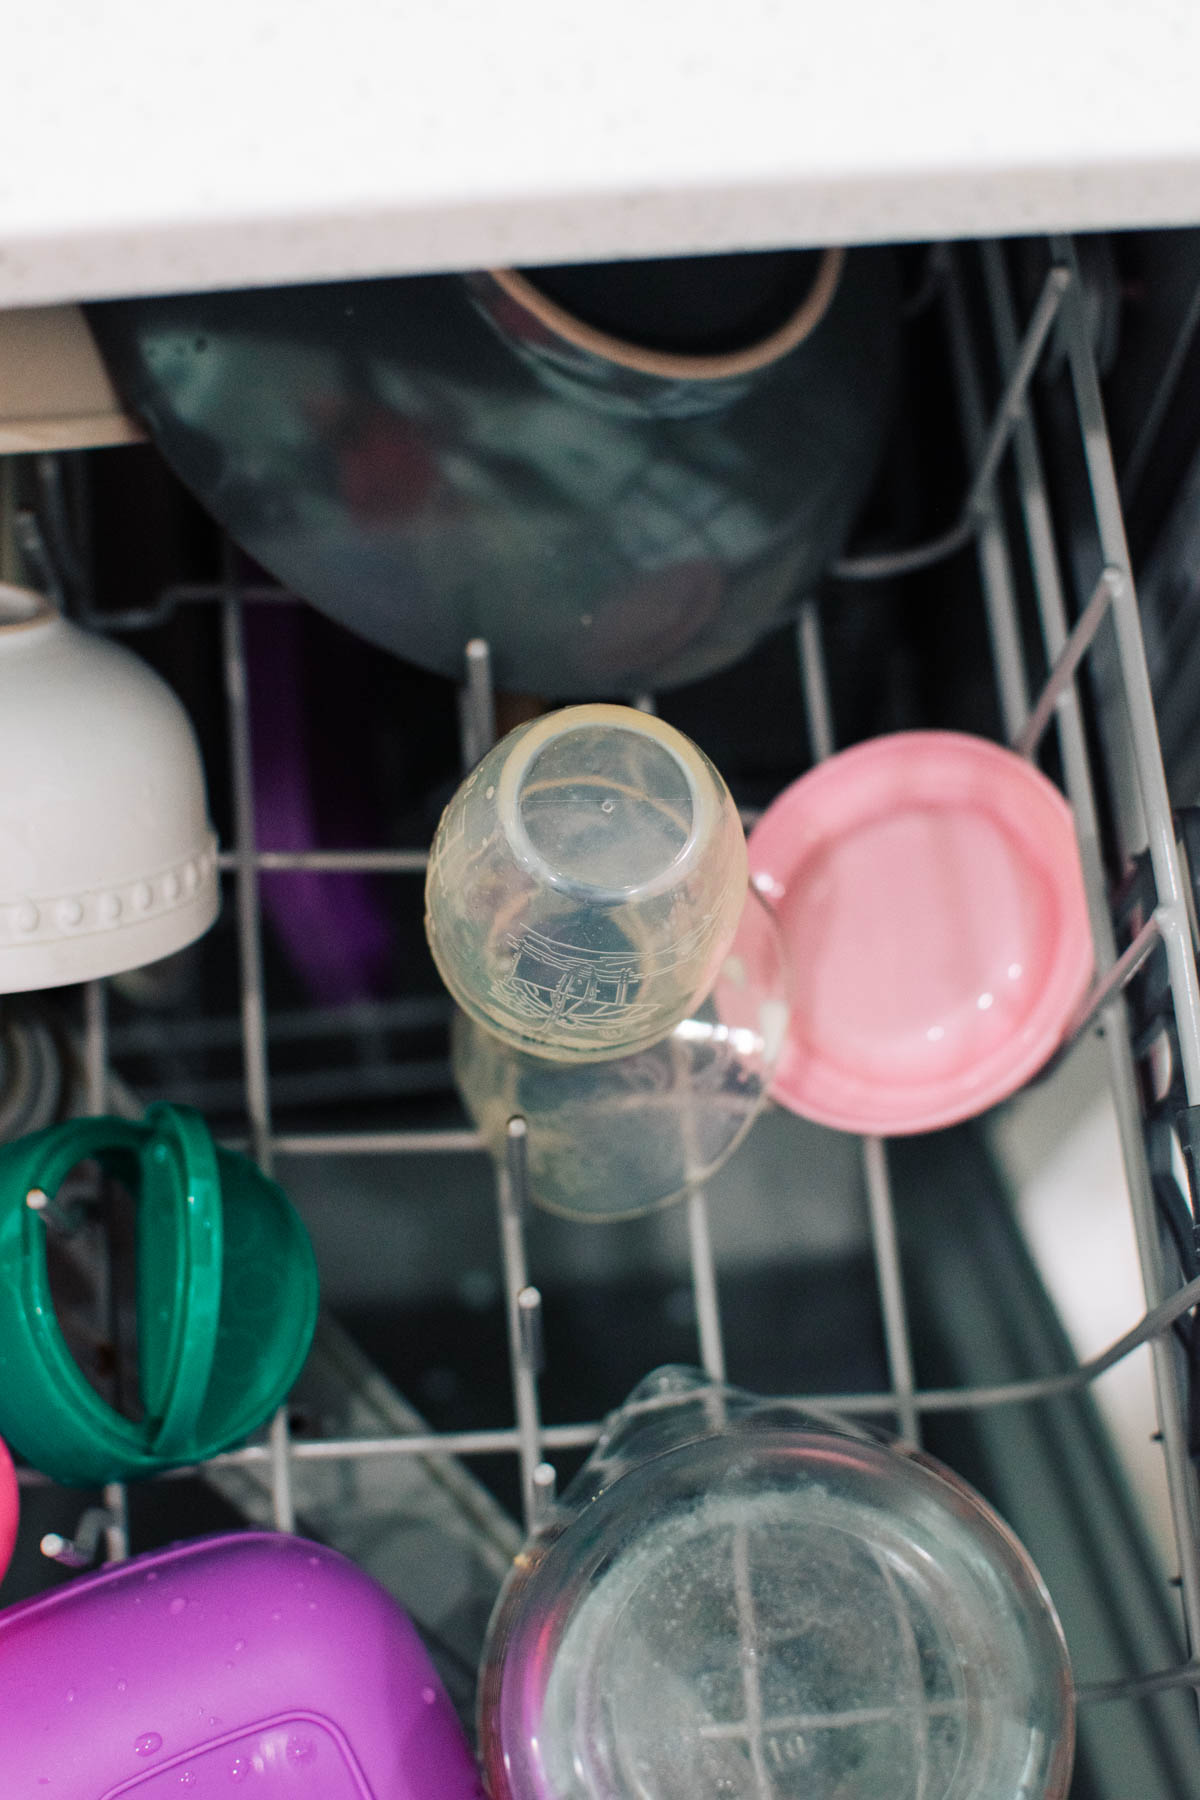 Haakaa pump and pink lid in dishwasher rack surrounded by other dishes.